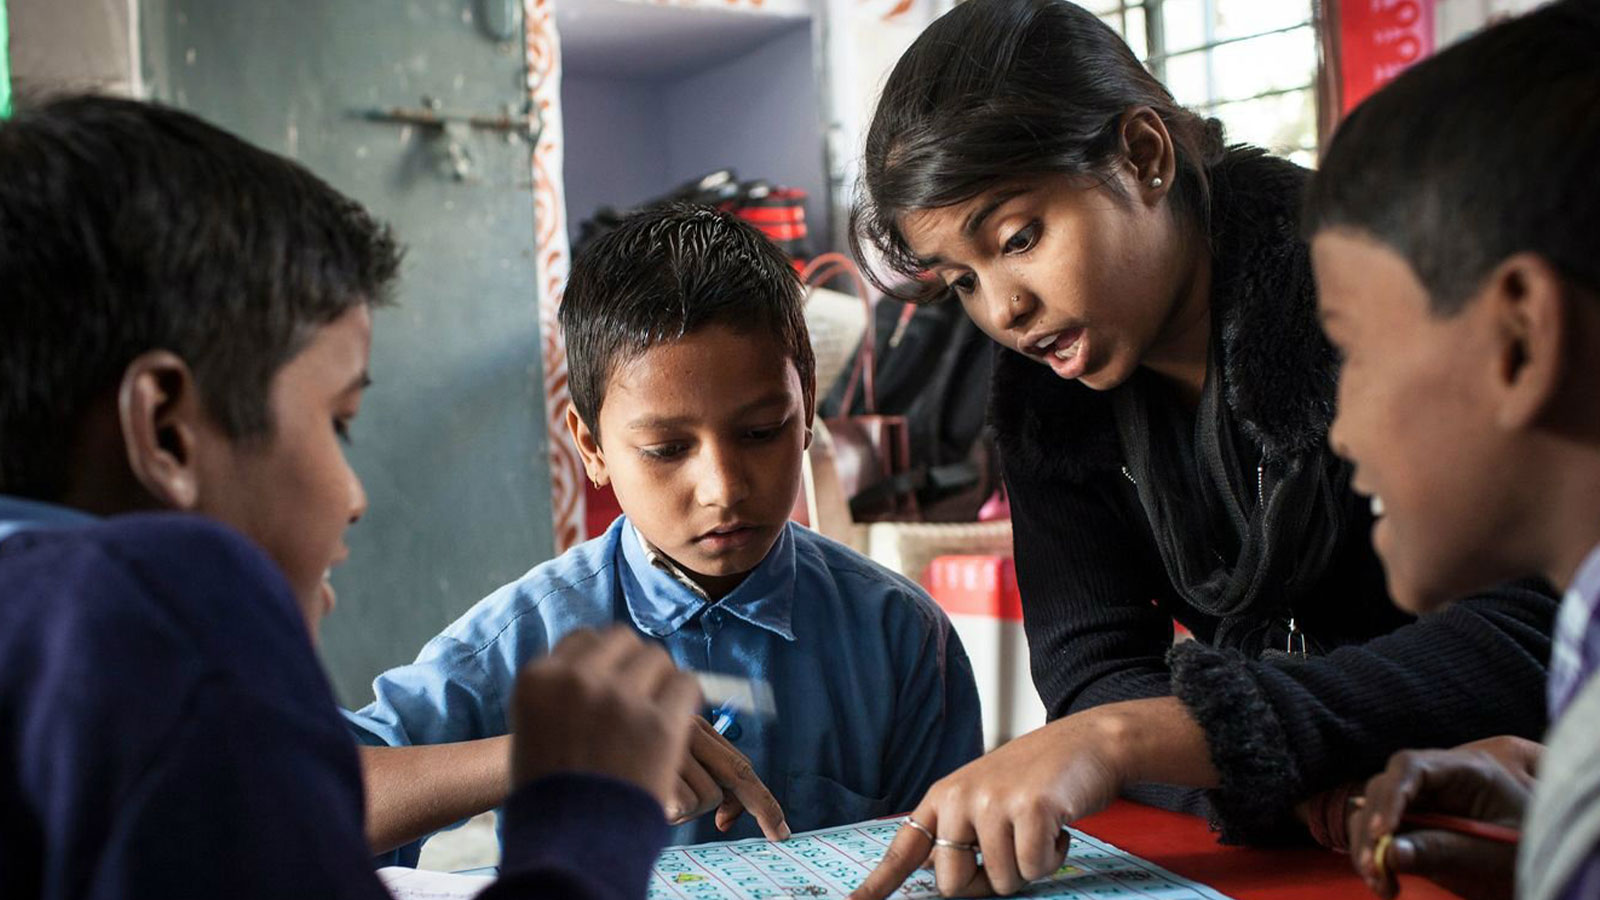 A schoolteacher in India goes over an assignment with three boys